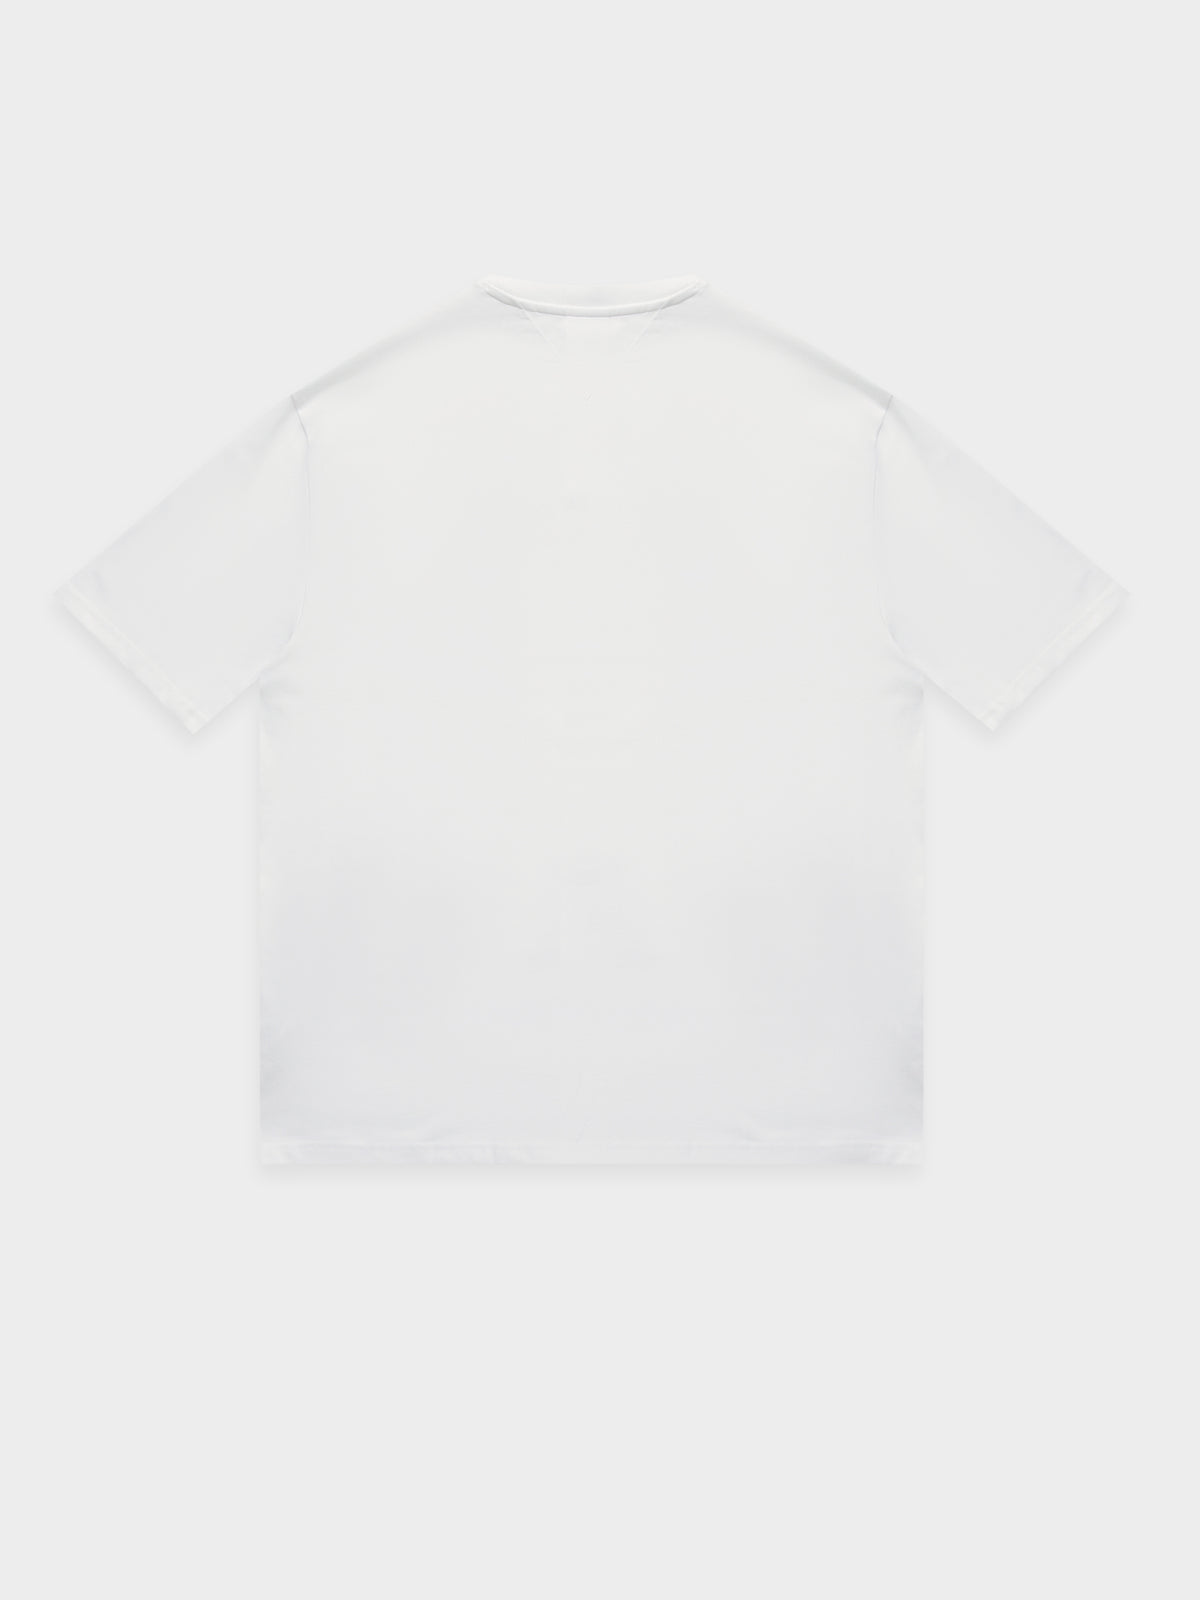 Timeless Arc T-Shirt in White